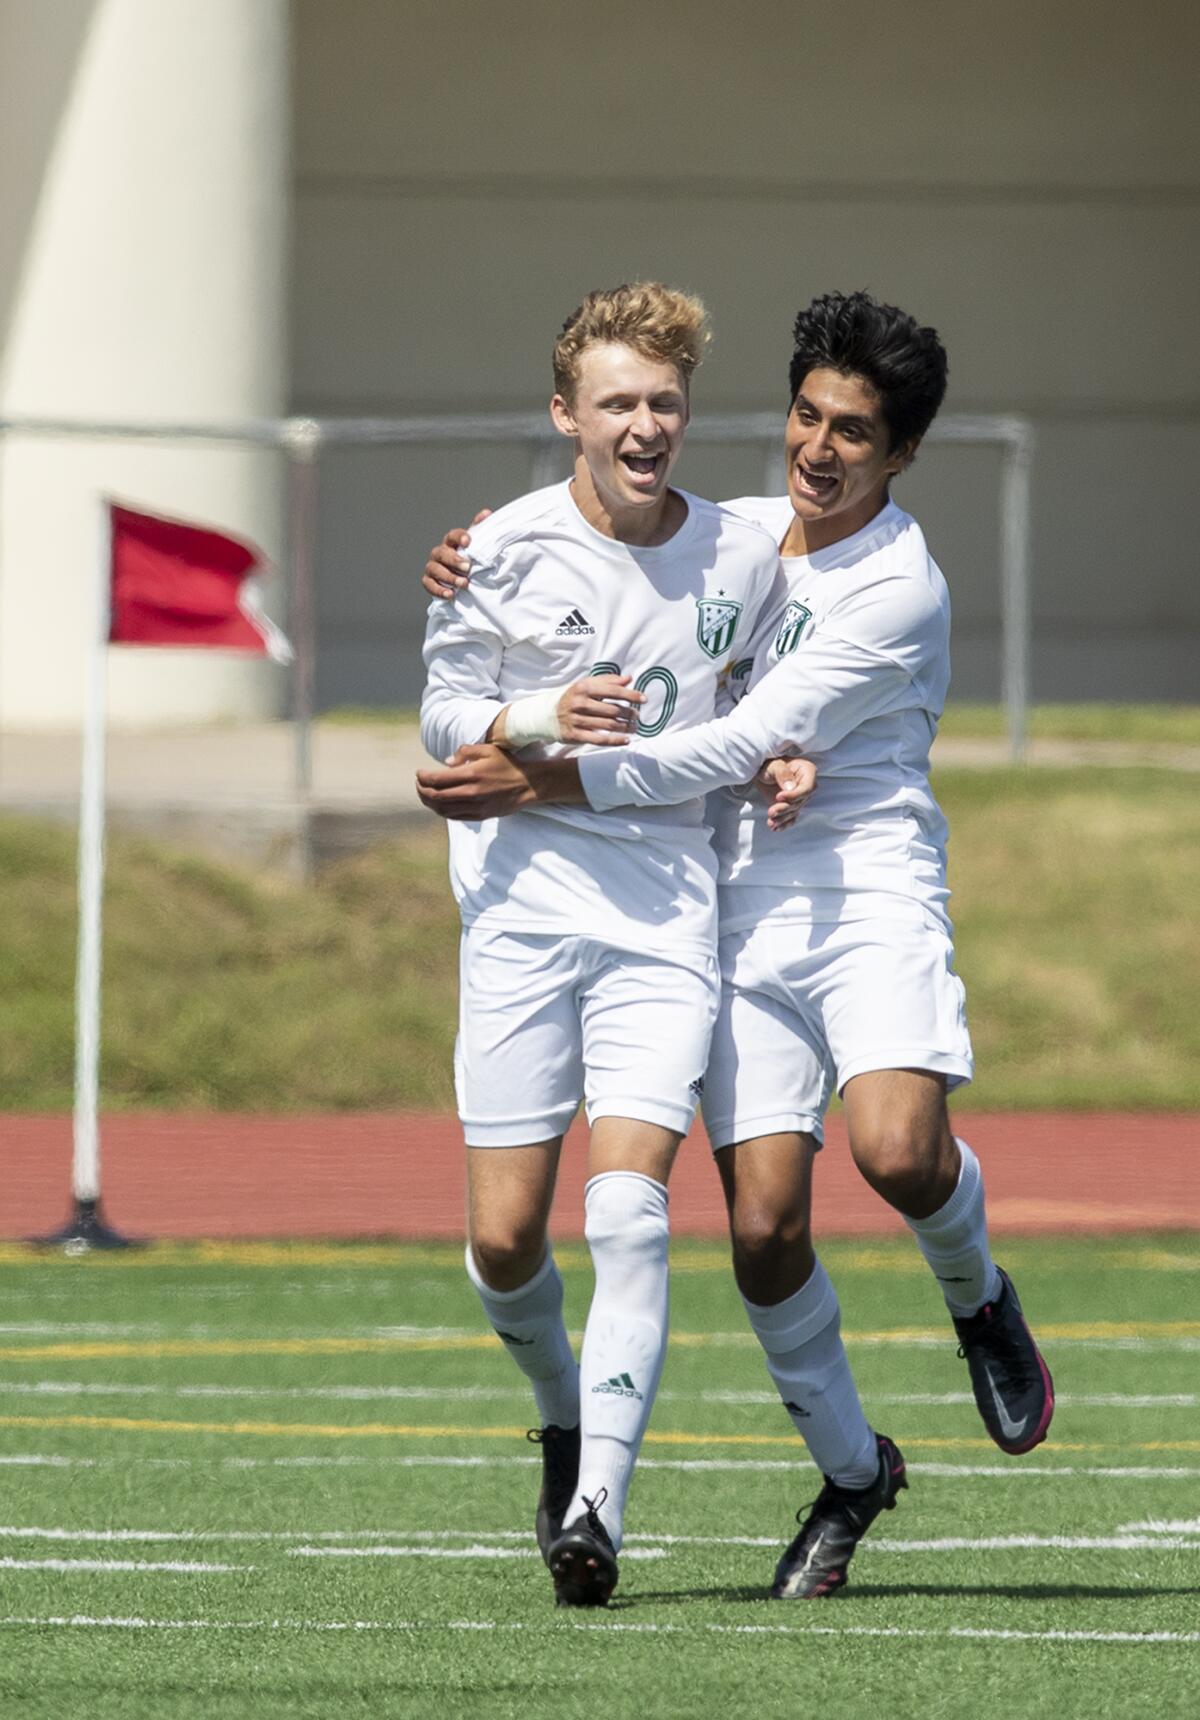 Edison's Kevin Blanco, right, congratulates Trent Bellinger after Bellinger scored a goal against Fountain Valley.